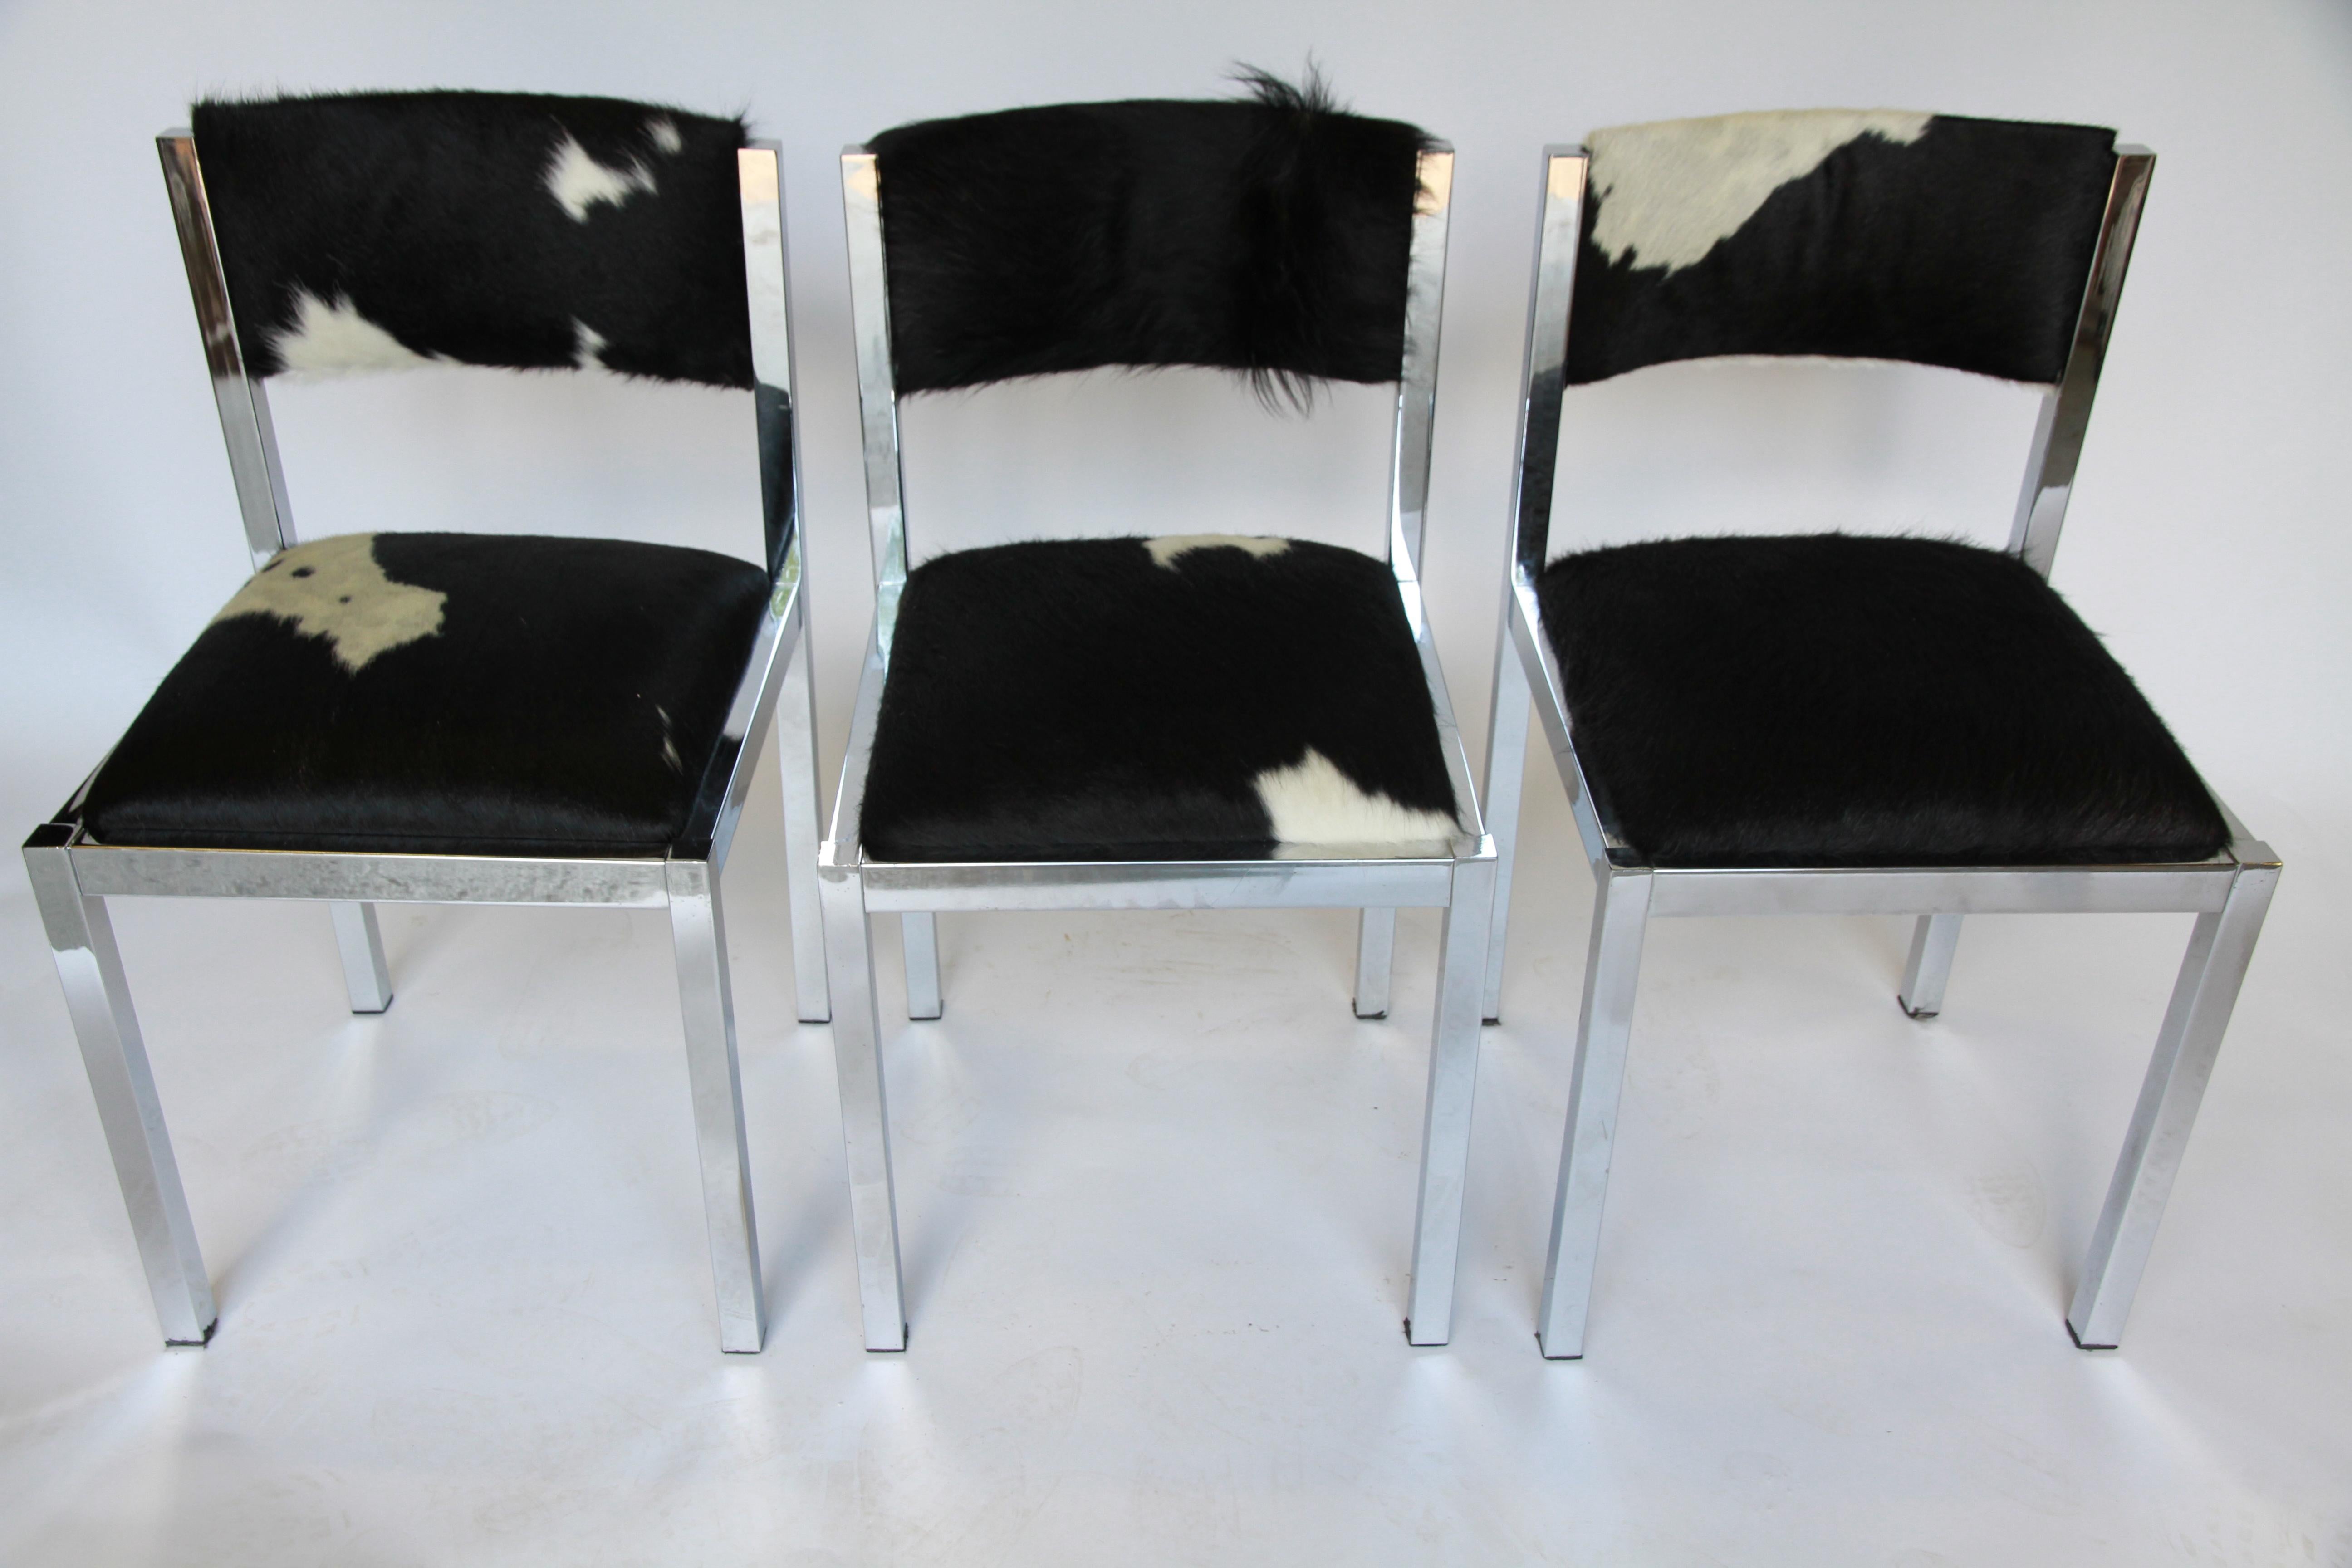 A set of six armless midcentury dining chairs from France. Square chrome frame with seat and back newly upholstered in black and white cowhide. A perfect addition to the upscale home or ranch.